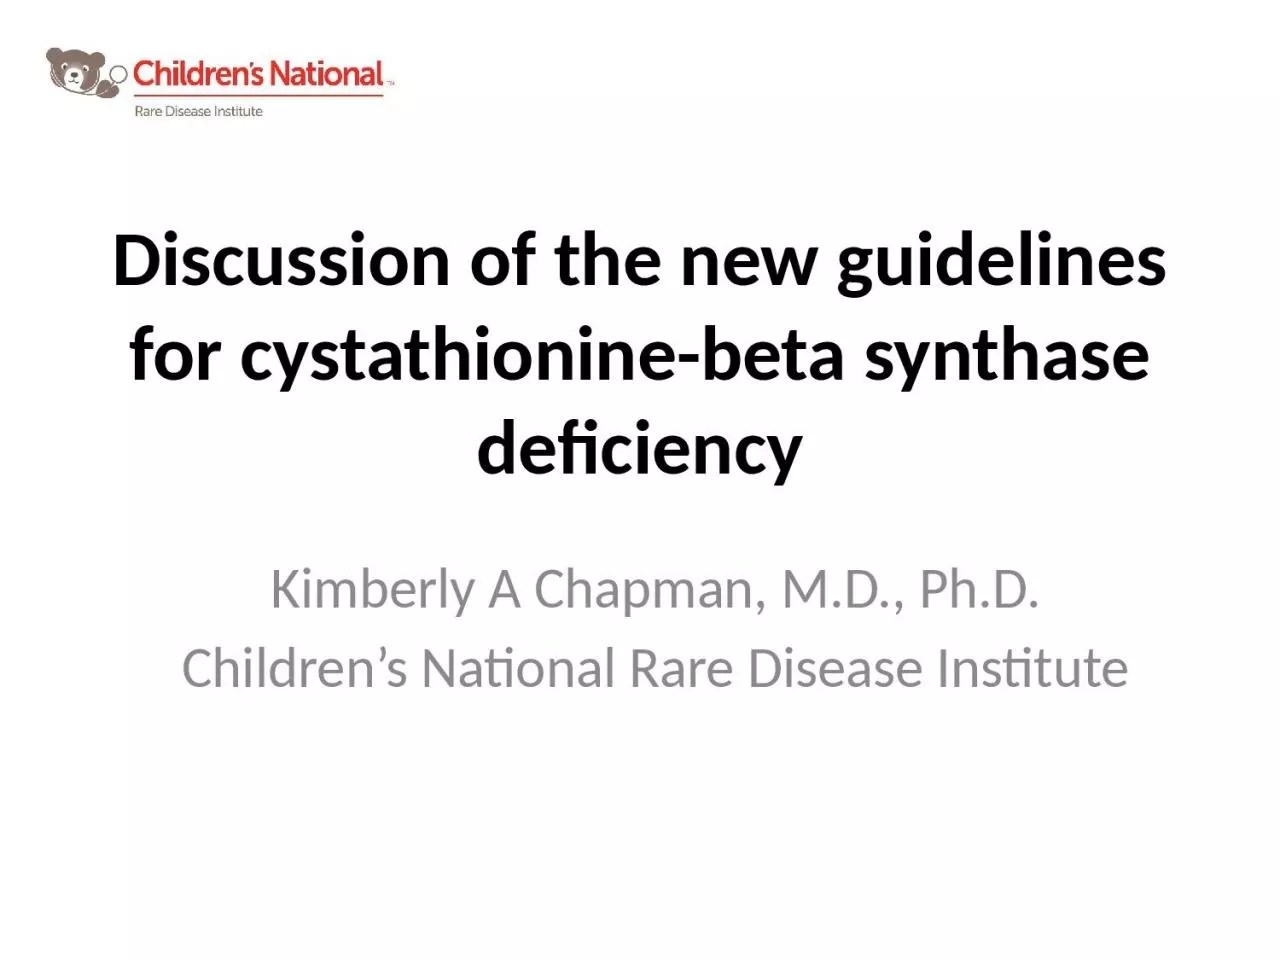 Discussion of the new guidelines for cystathionine-beta synthase deficiency